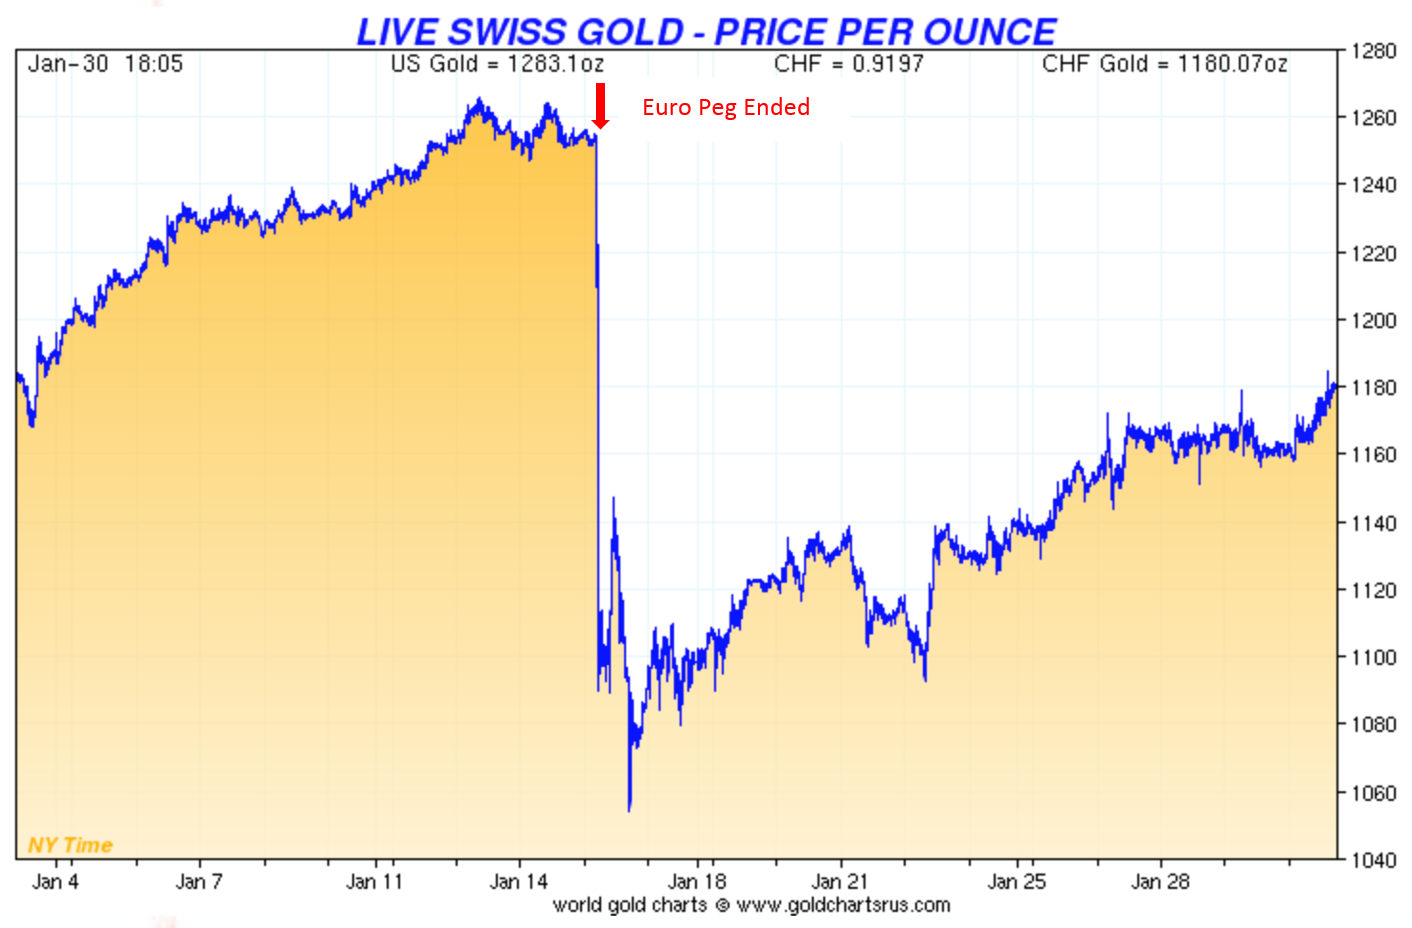 Price of Gold in Swiss Francs at the End of the Peg